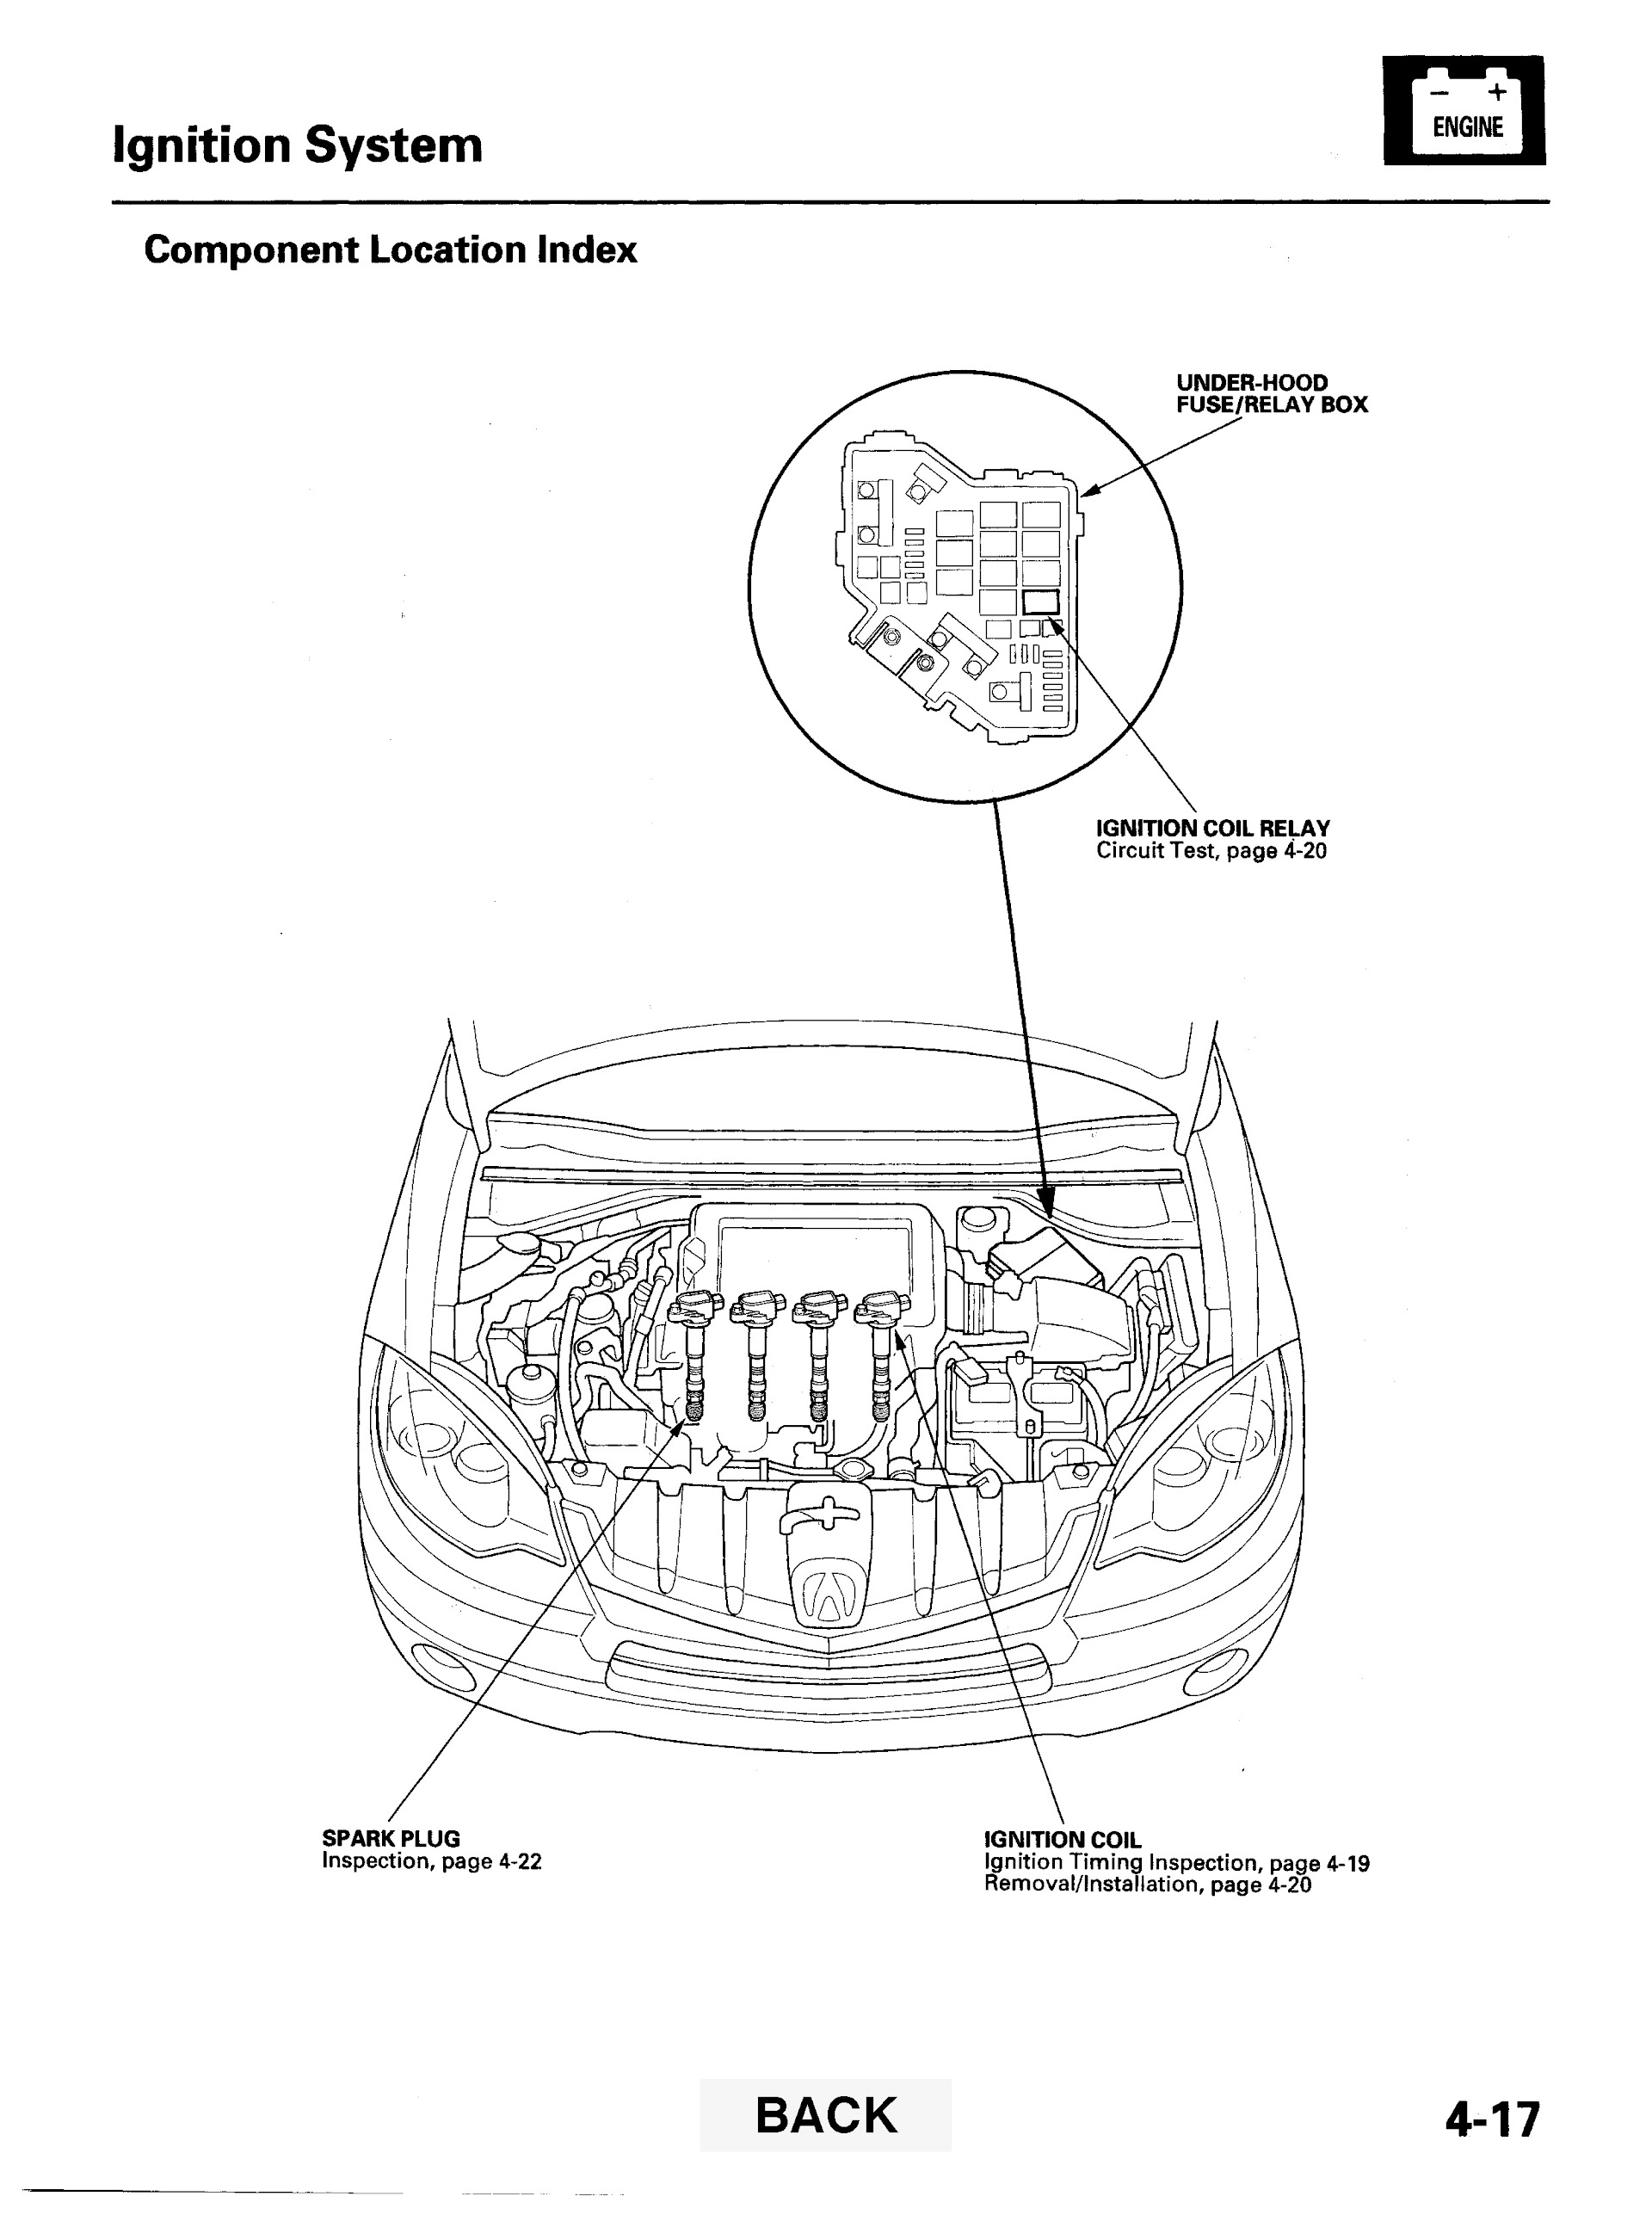 2007 Acura RDX Repair Manual, Ignition System